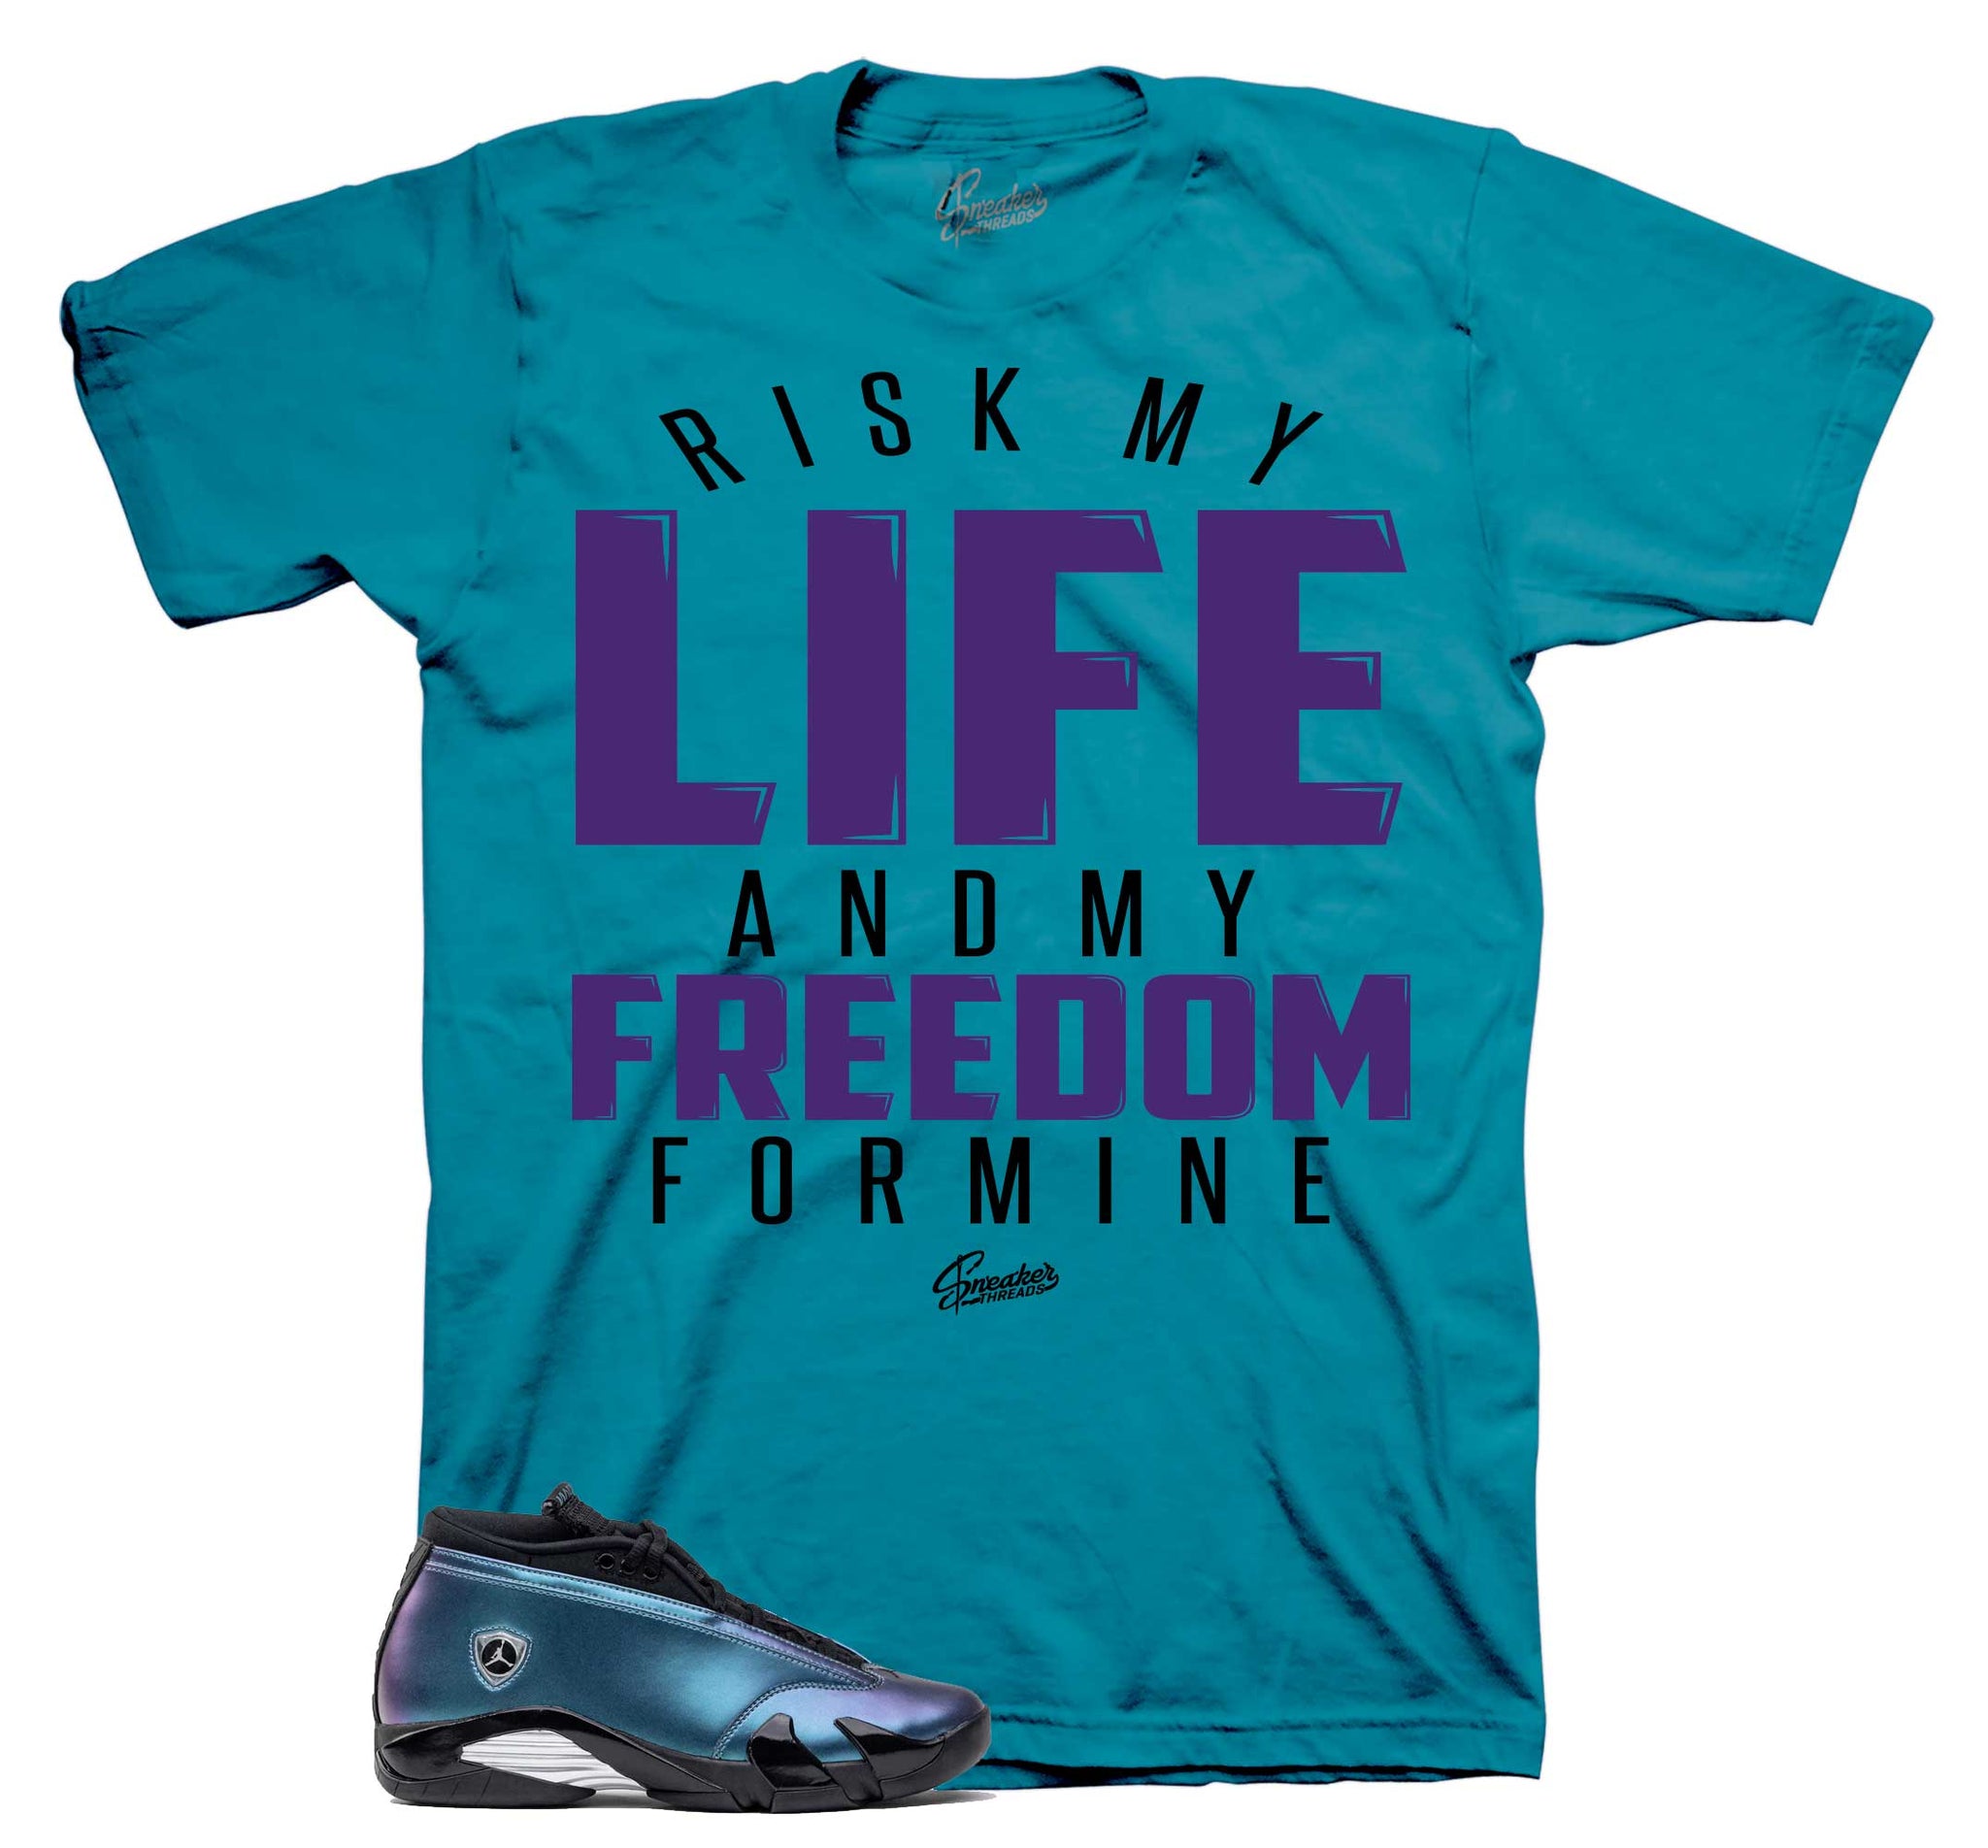 Retro 14 Love Letter Shirt - My Life - Teal